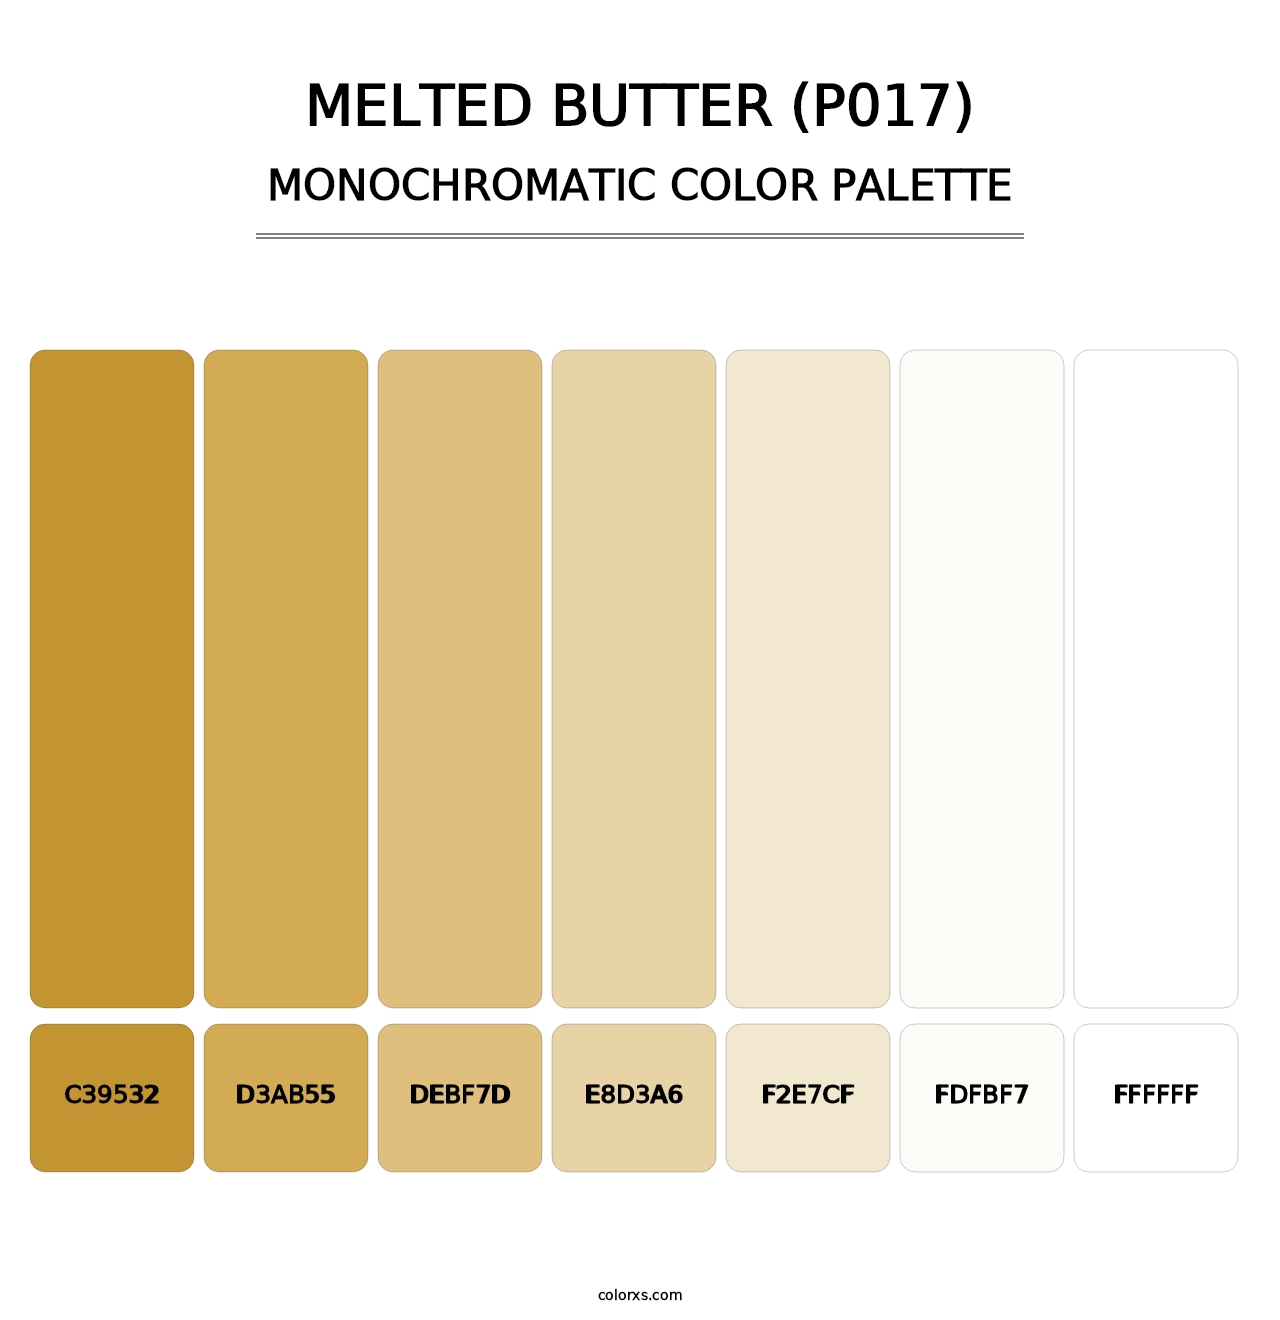 Melted Butter (P017) - Monochromatic Color Palette